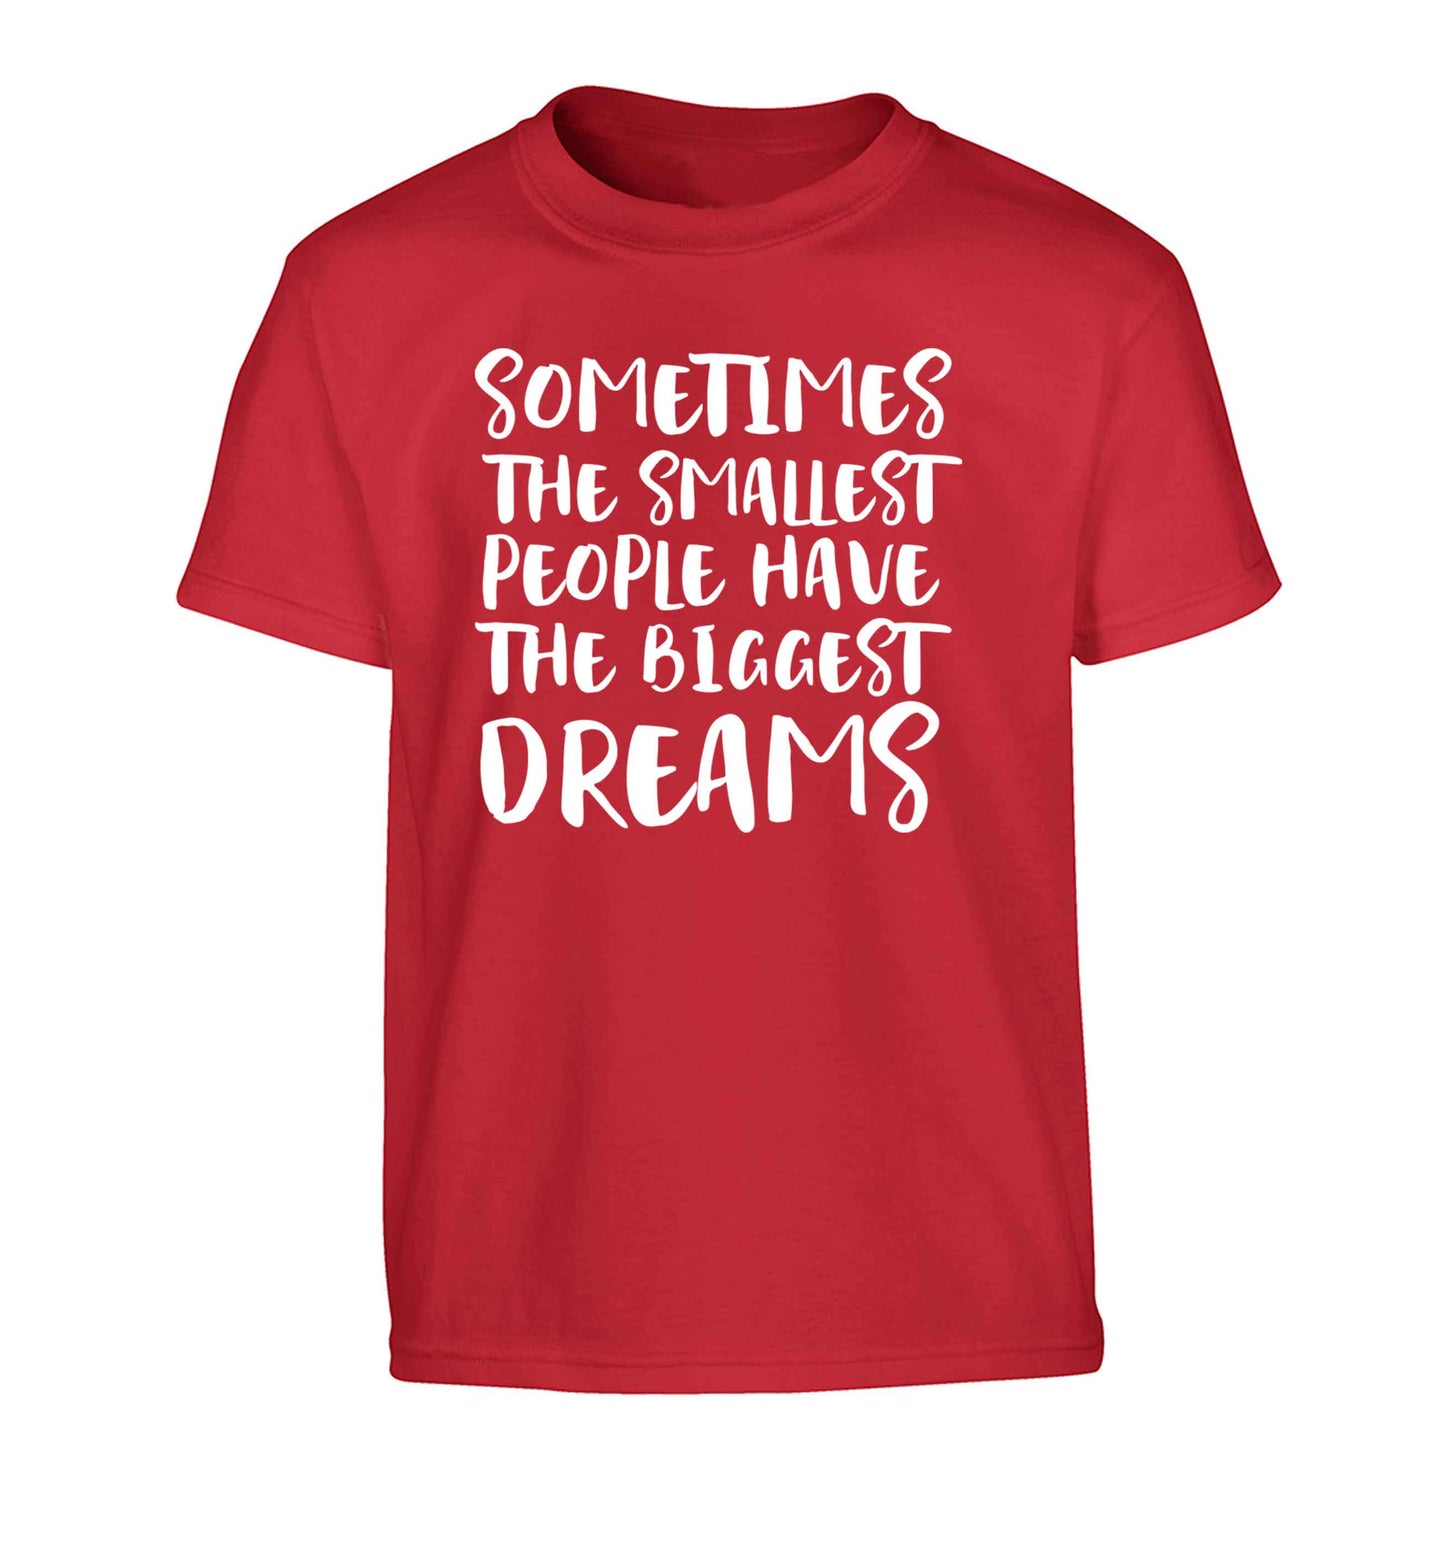 Sometimes the smallest people have the biggest dreams Children's red Tshirt 12-13 Years